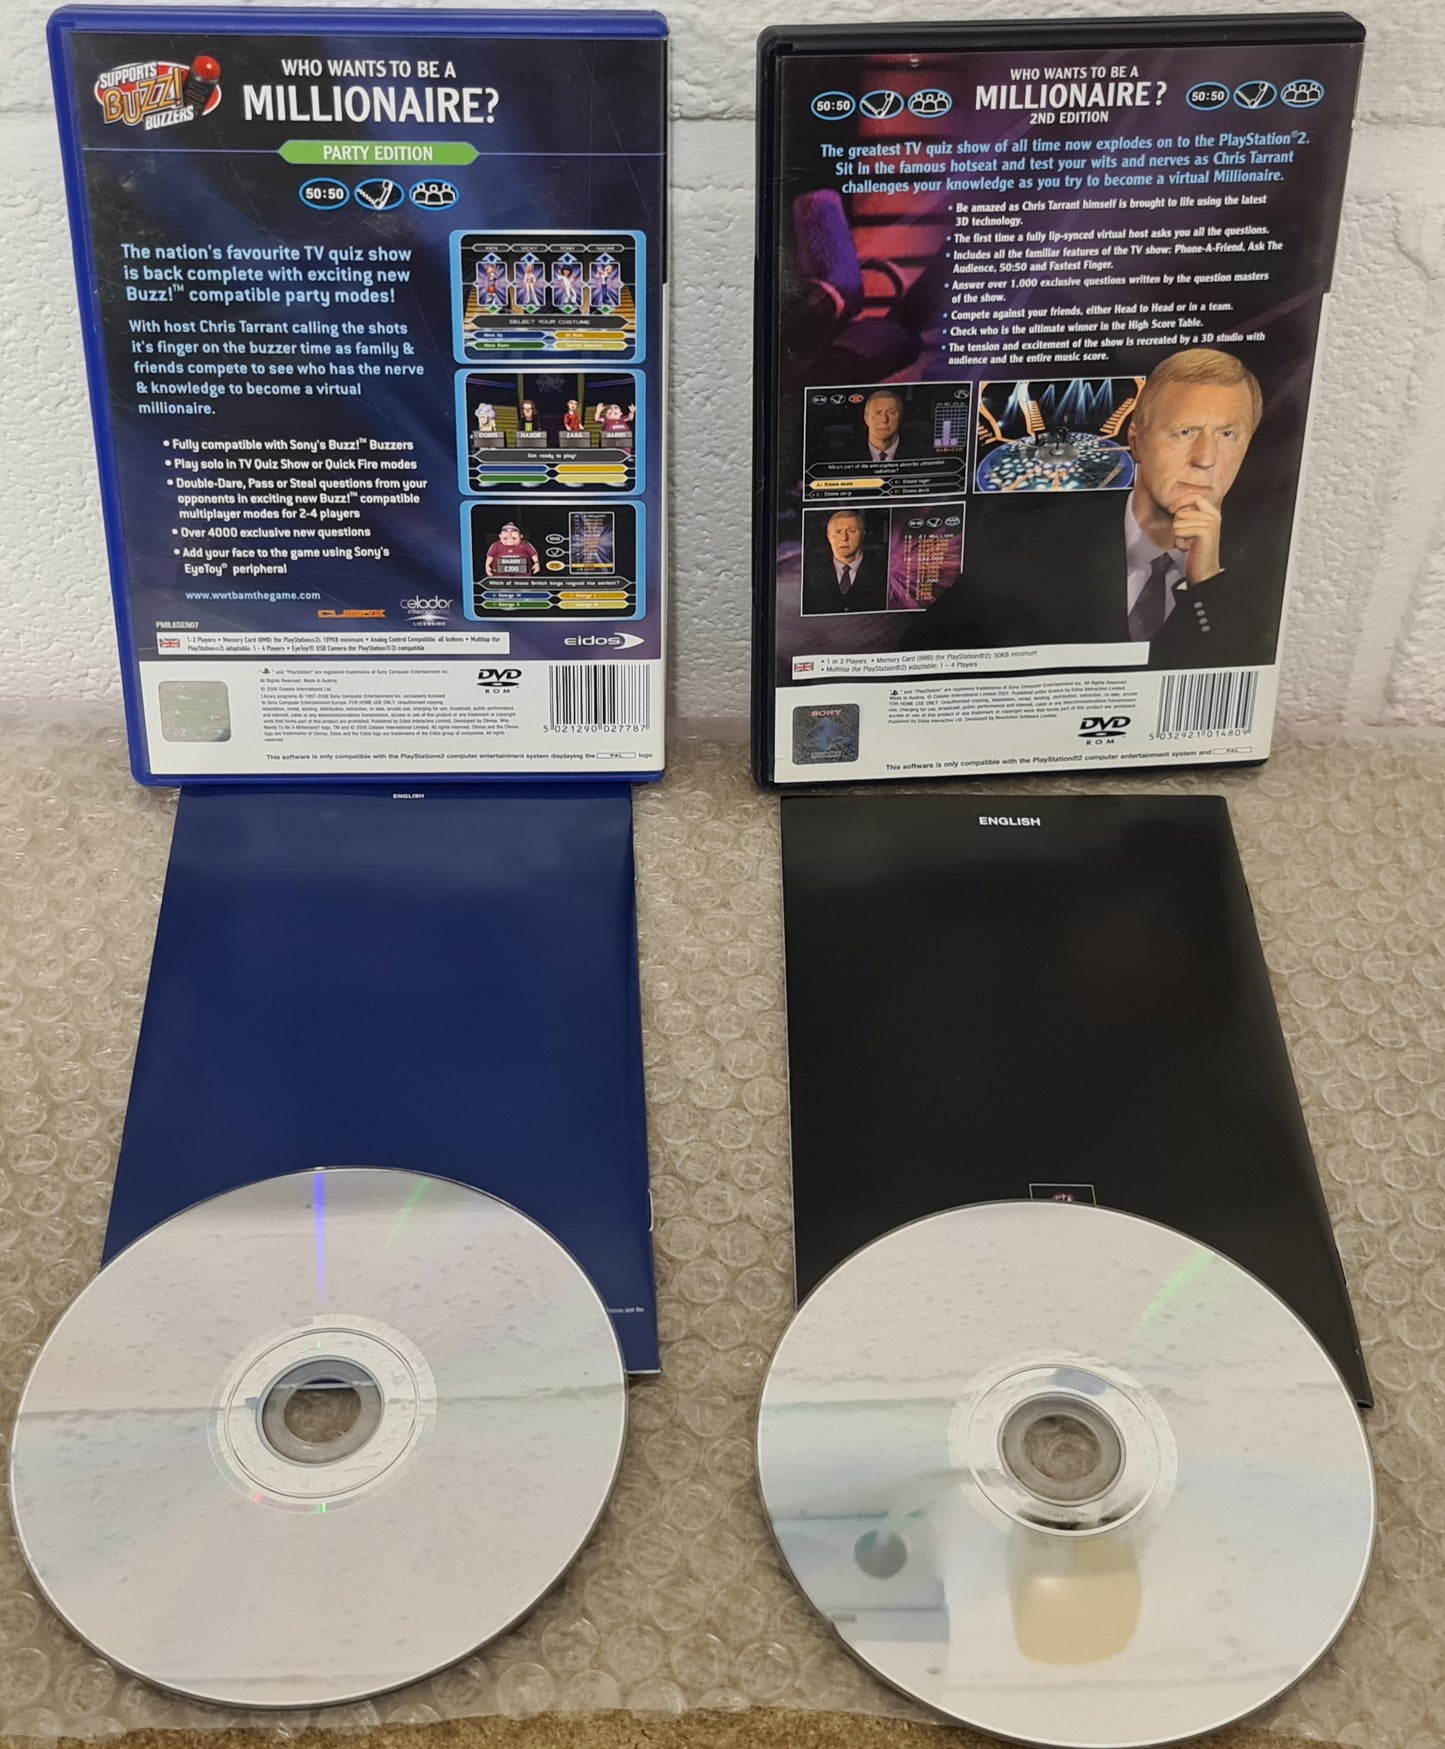 Who Wants to be a Millionaire? Party & 2nd Edition Sony Playstation 2 (PS2) Game Bundle